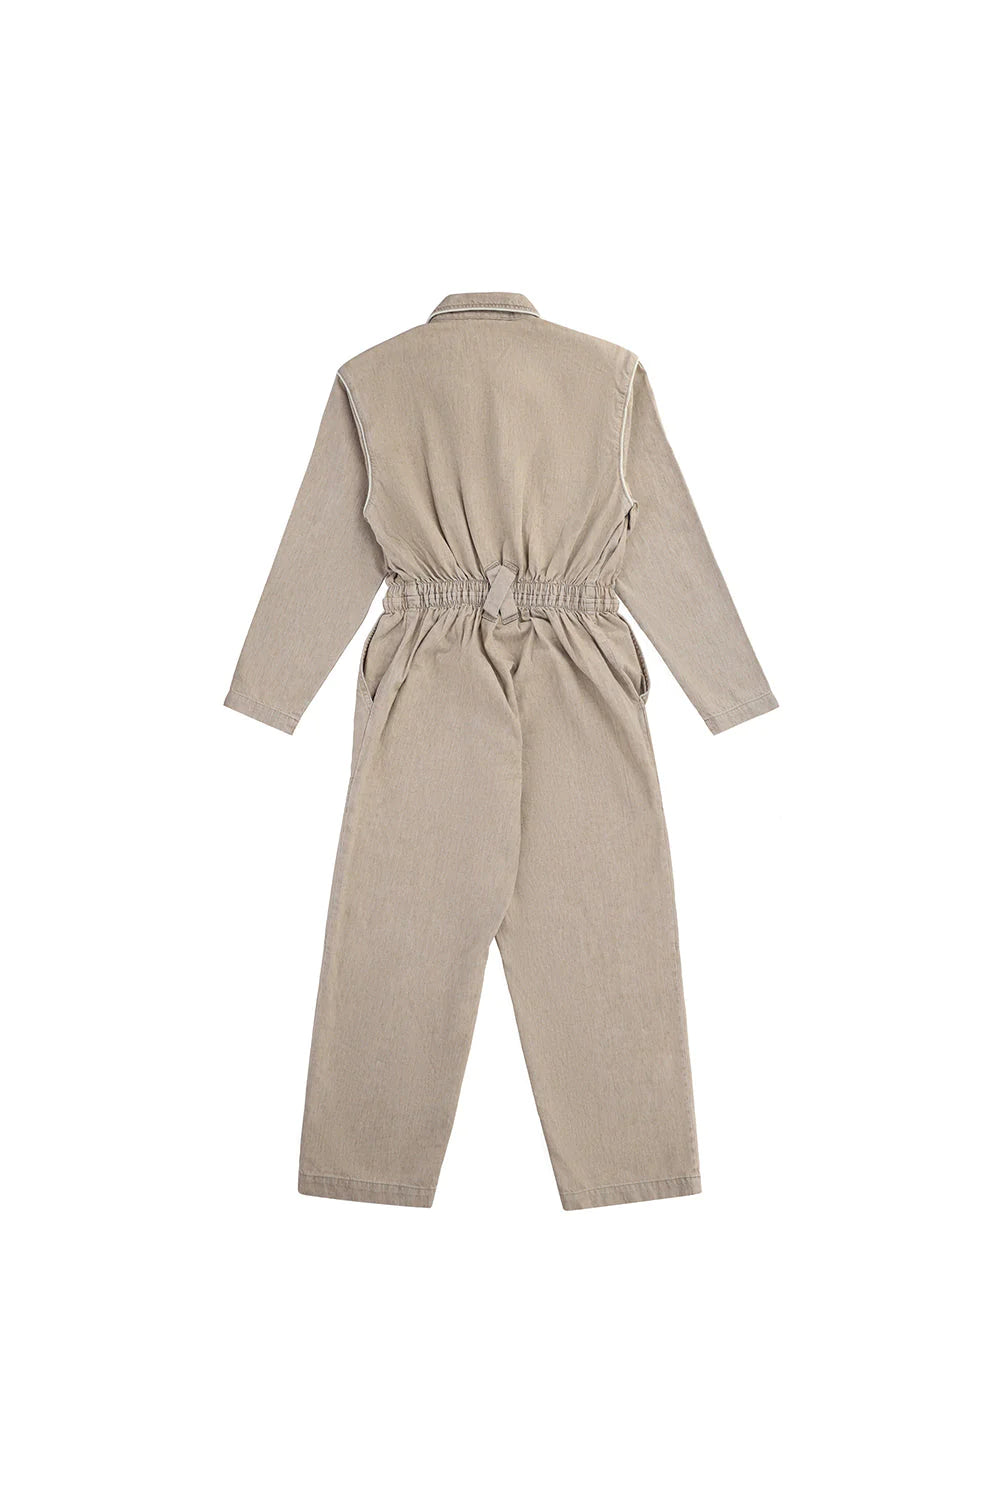 Amelia All in One - Sand Linen